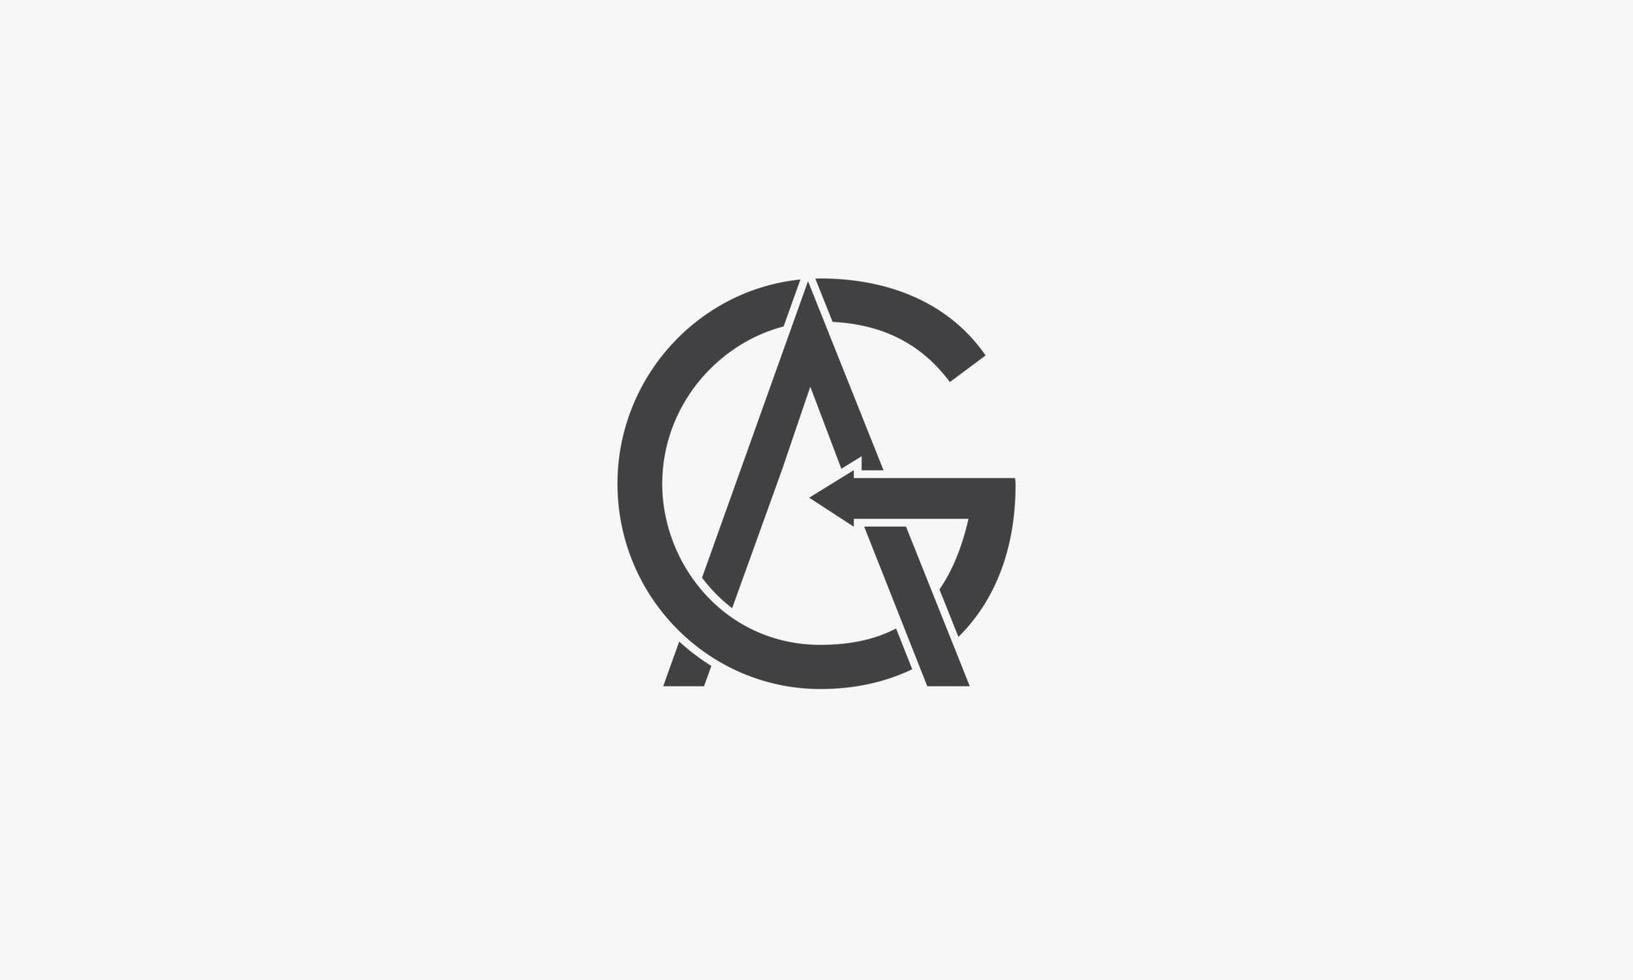 AG or GA with arrow logo concept isolated on white background. vector